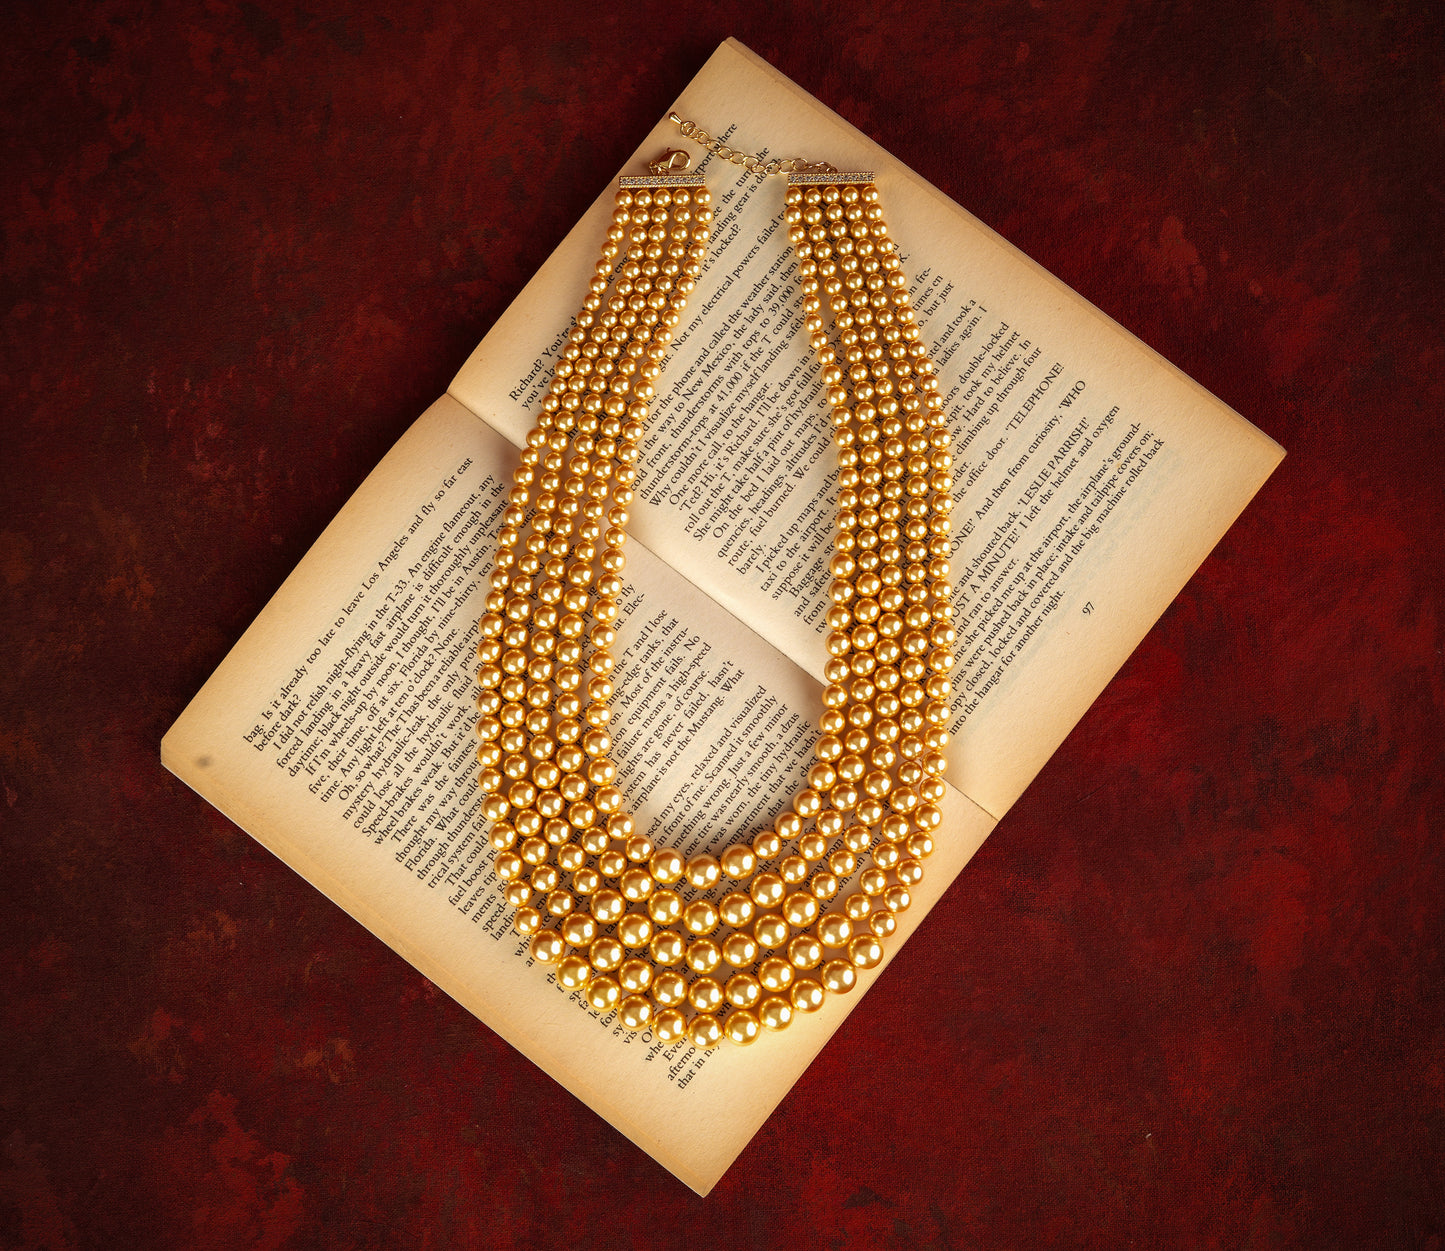 Golden Vibes Pearl Cocktail Necklace